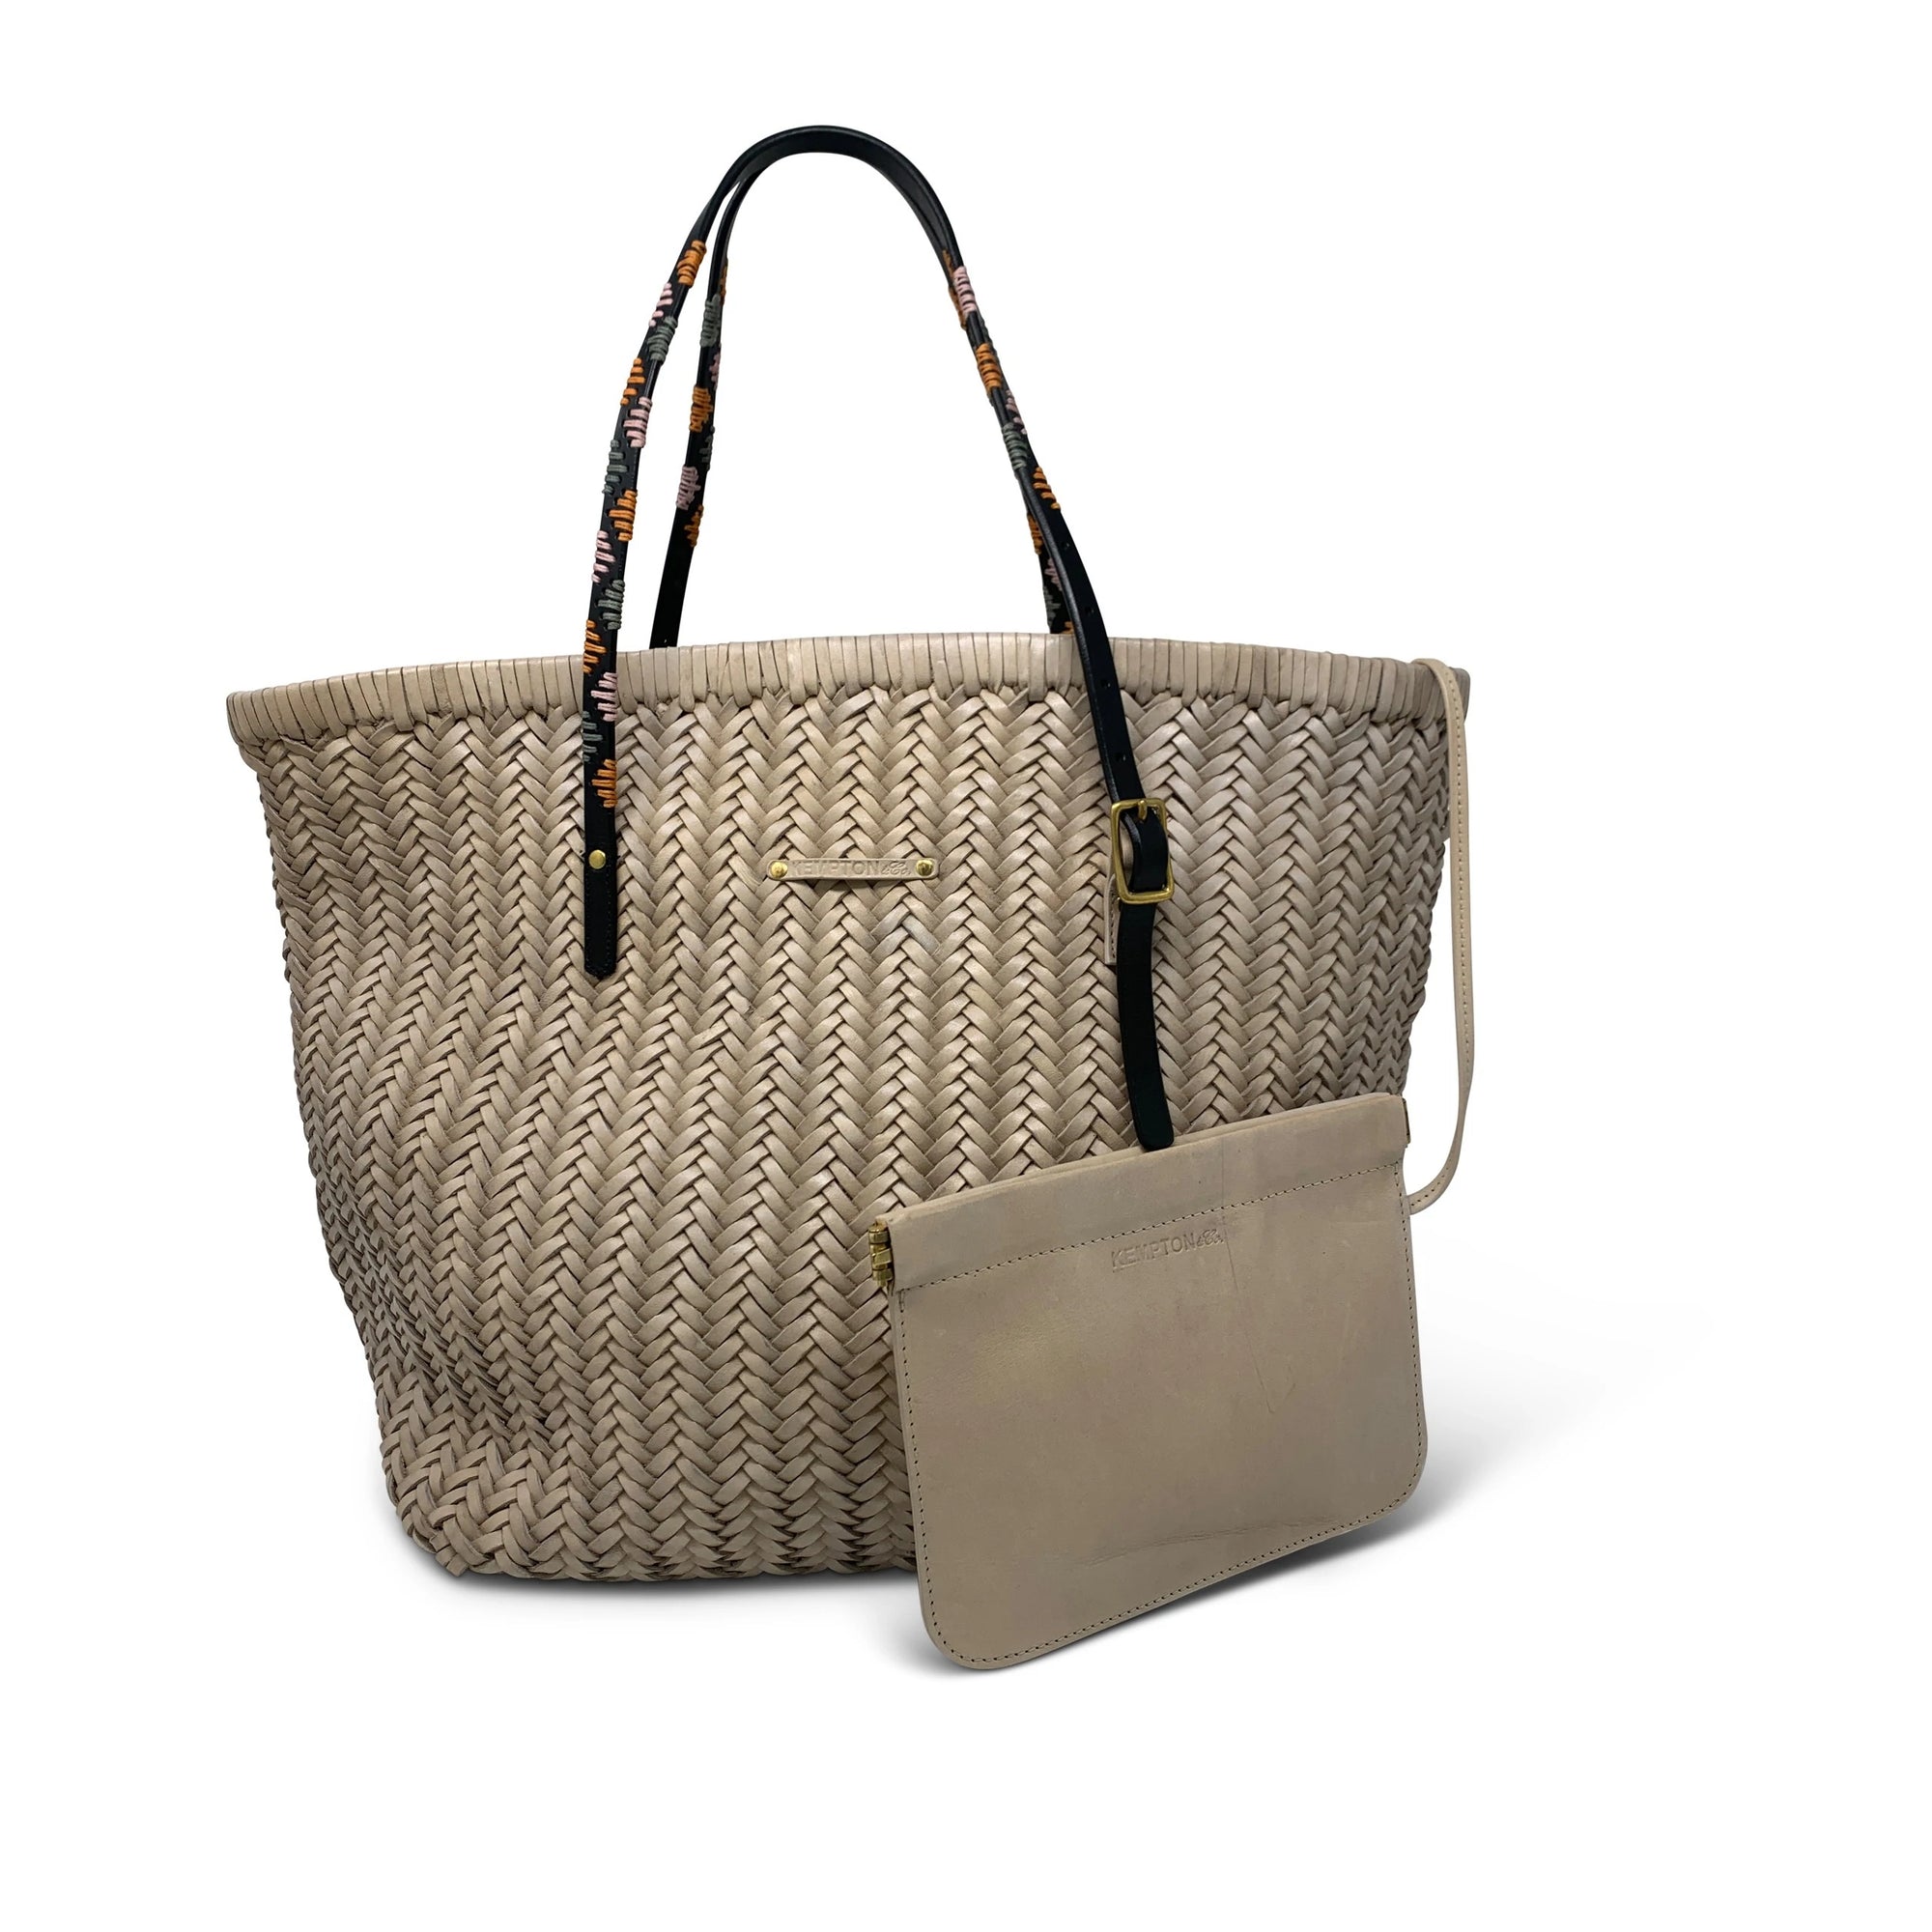 Chalk Weaved Leather Tote